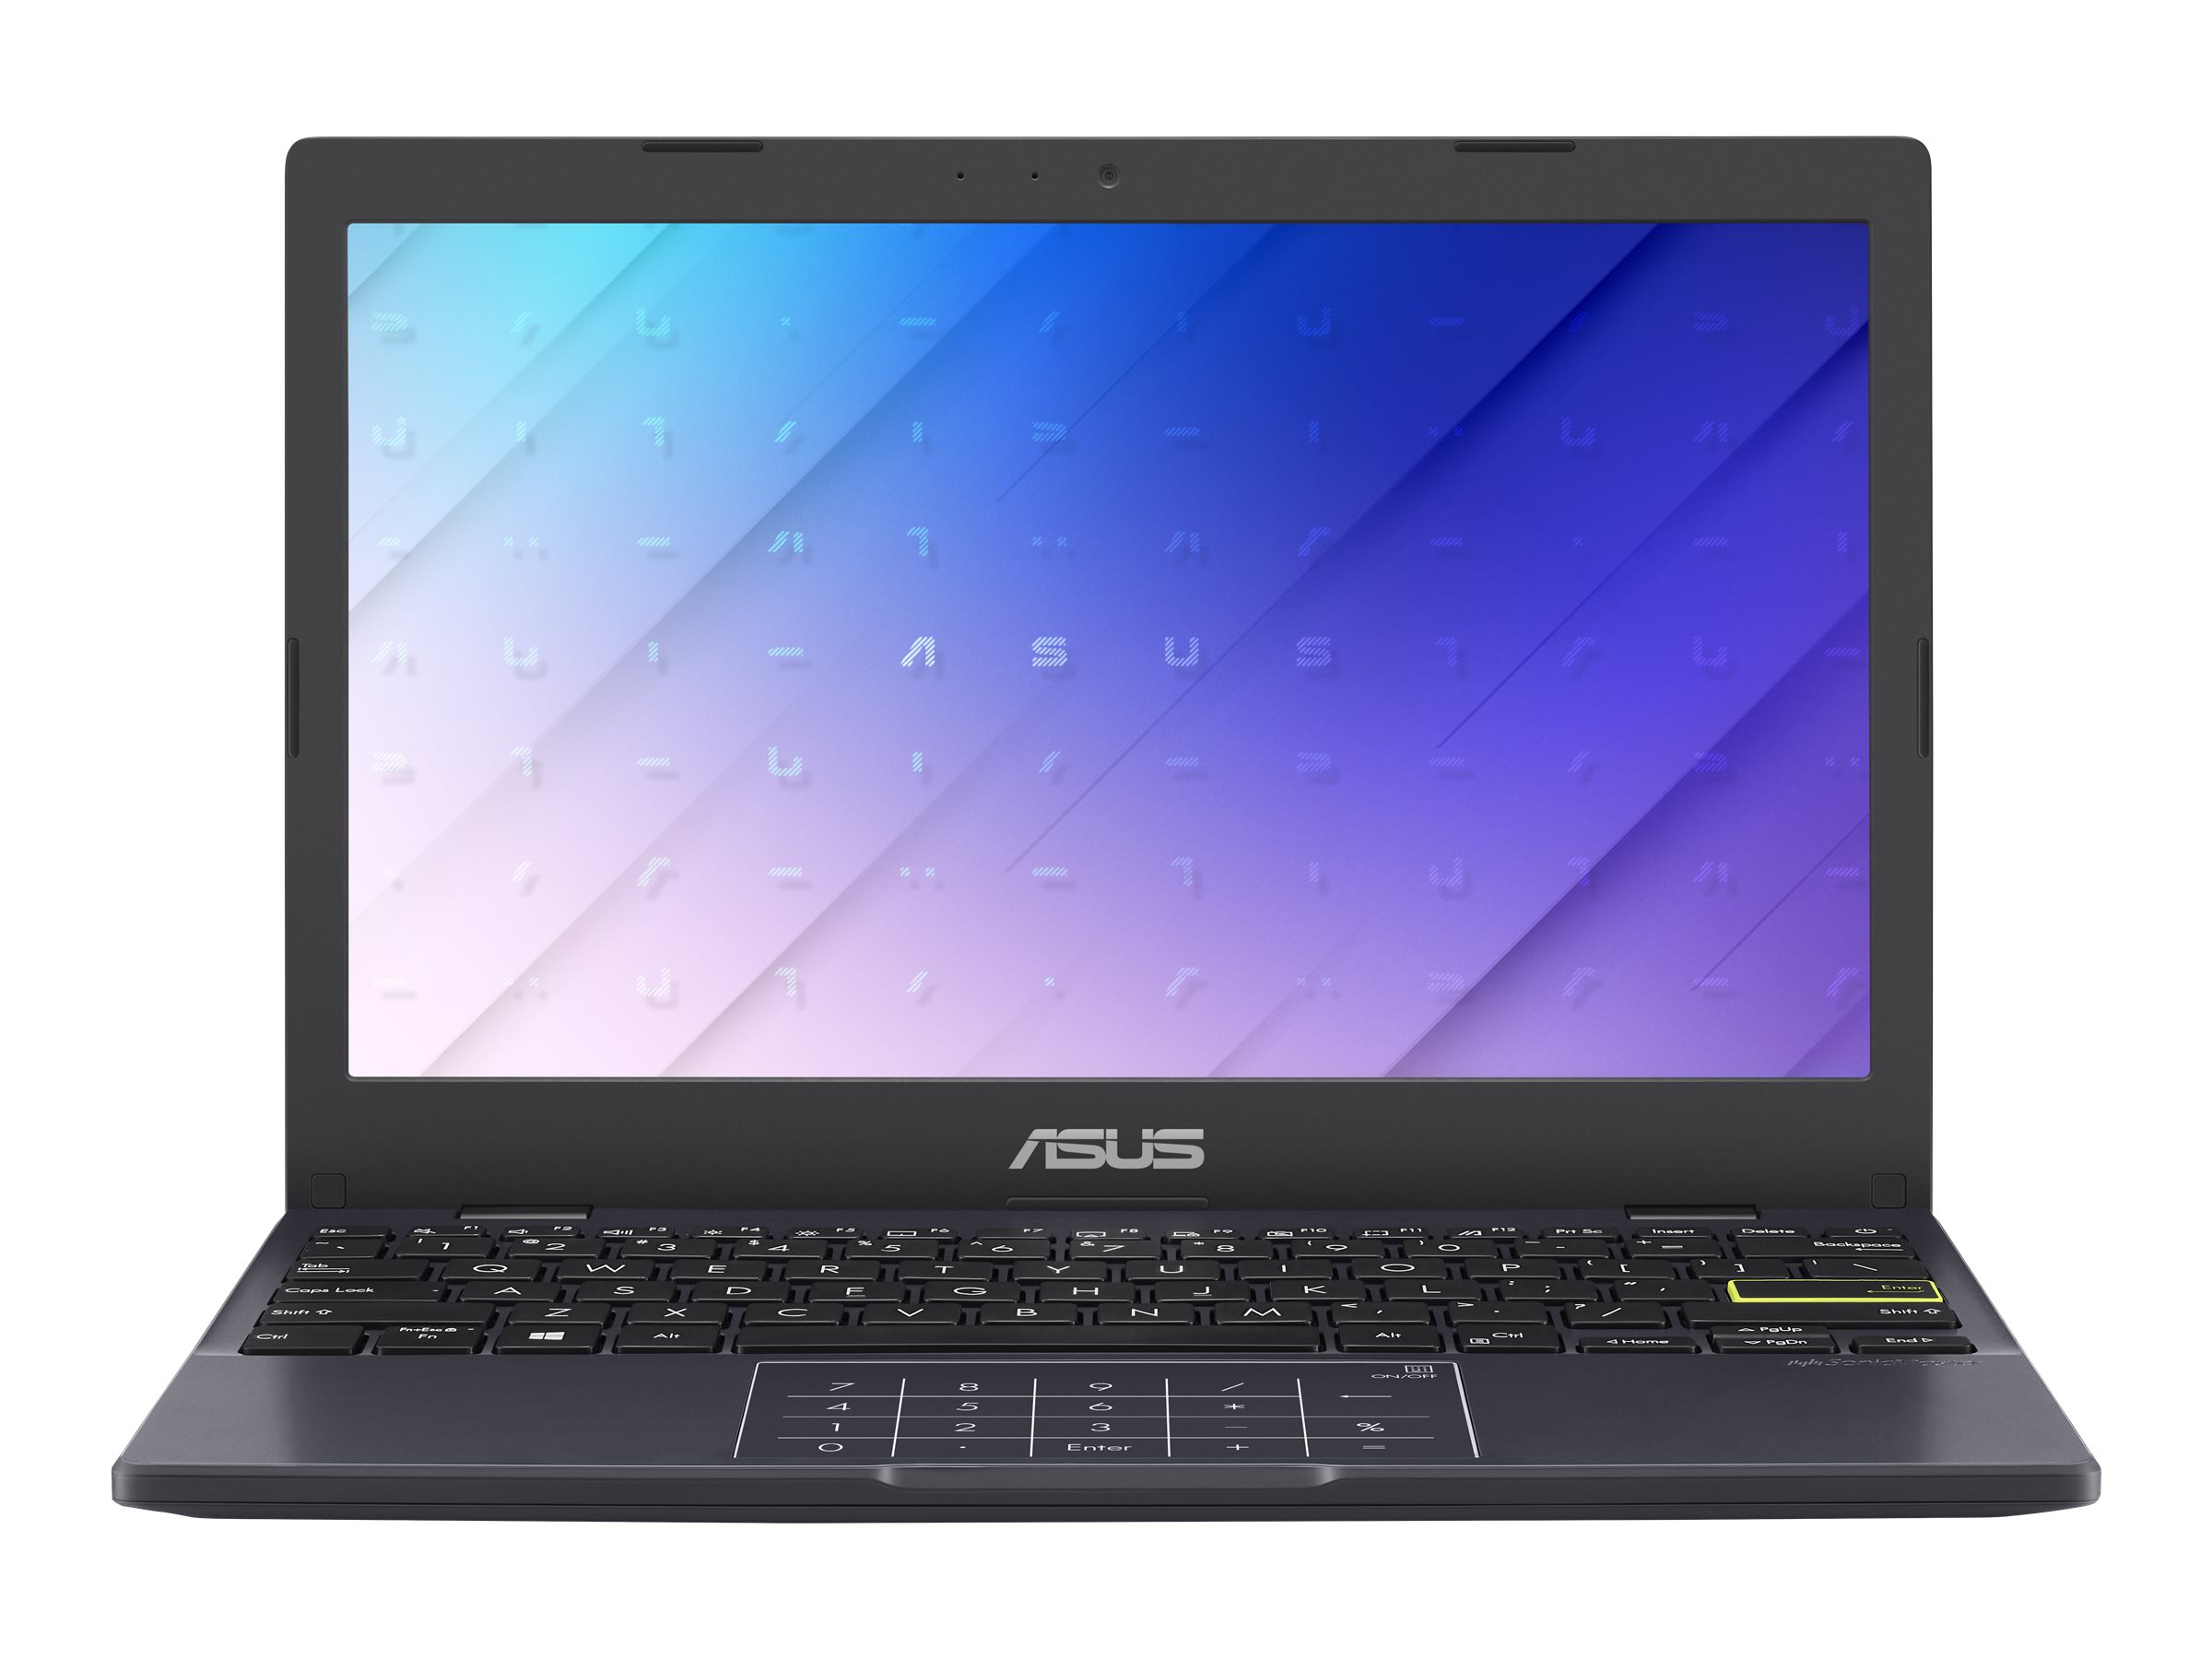 ASUS ZenBook Pro Duo UX581LV (H2024T) - full specs, details and review